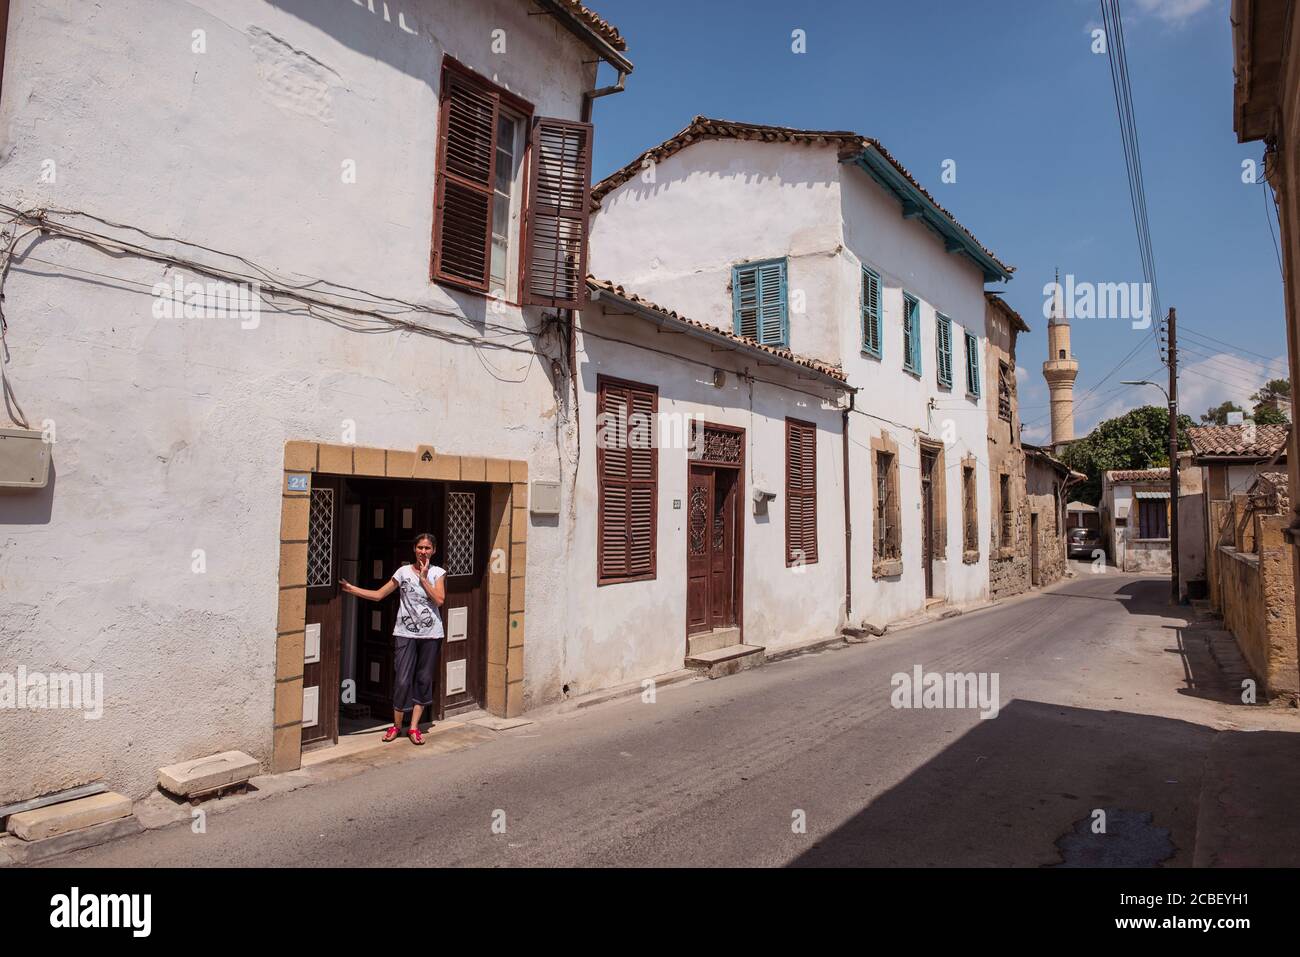 Nicosia / Northern Cyprus - August 15, 2019: Ethnic Turkish woman leaning out of her house with a mosque in the background in the part of Nicosia that belongs to North Cyprus Stock Photo